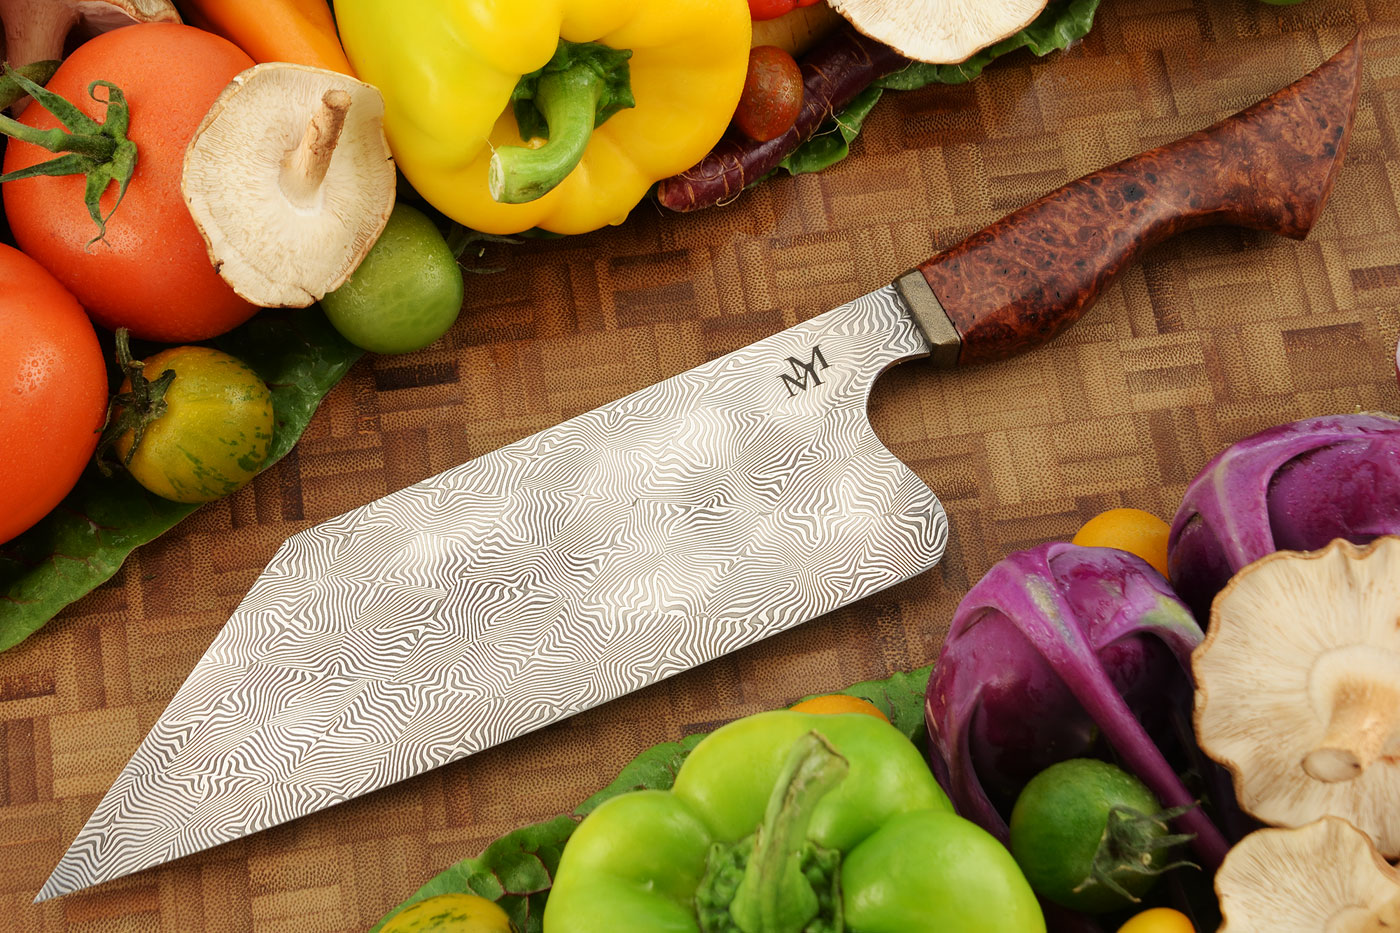 Mosaic Damascus K-Tip Chef's Knife (9 in.) with Amboyna Burl